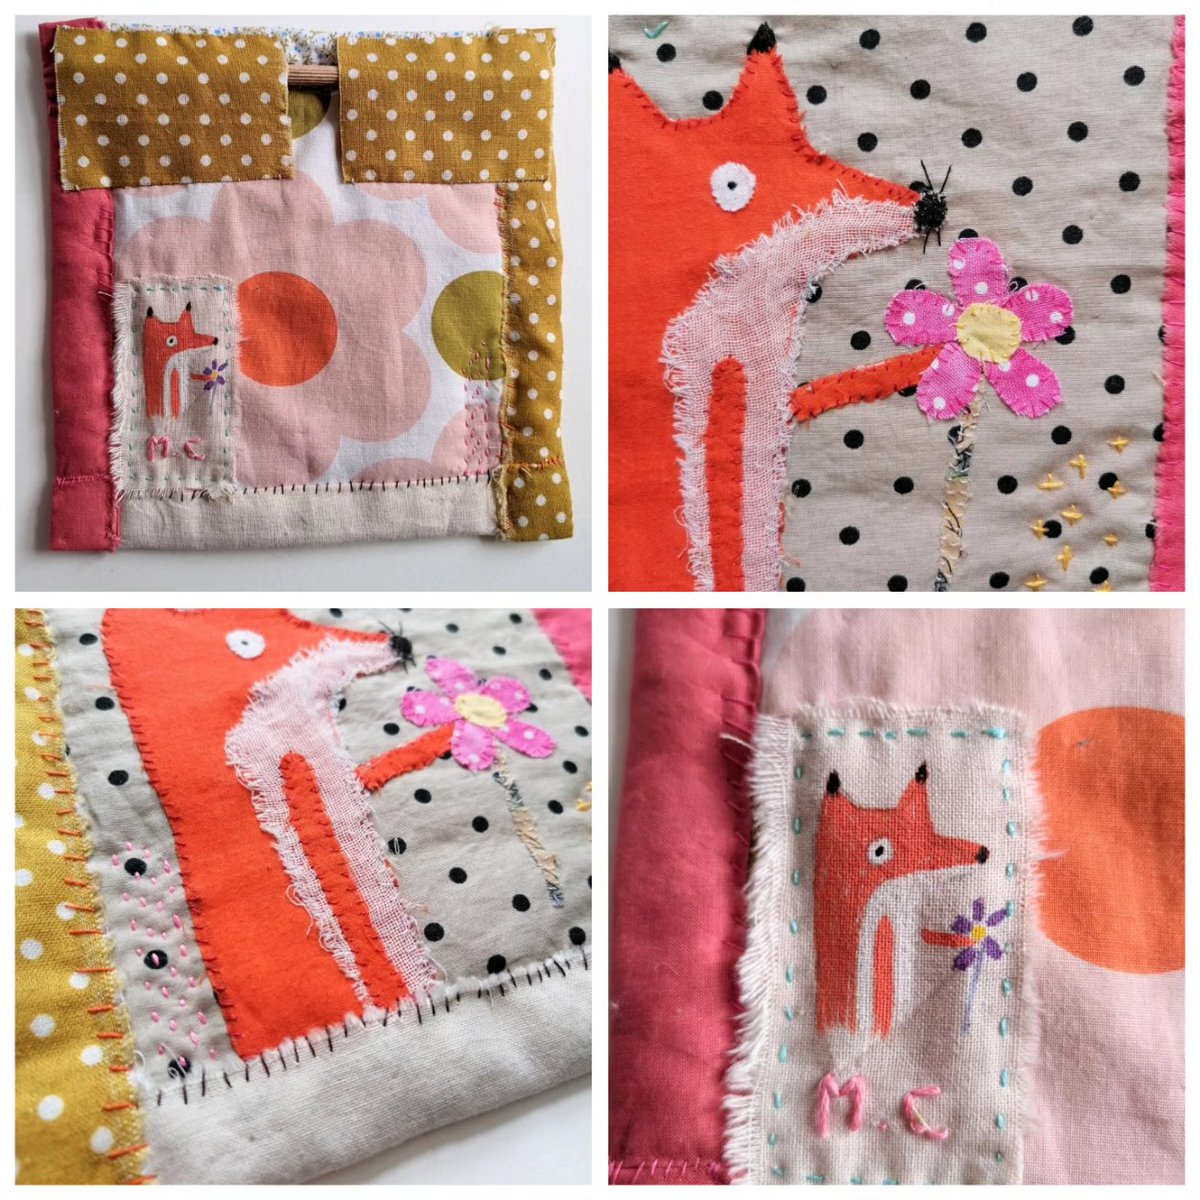 A small quilt with a little fox holding a pink flower. A Hand sewn, perfectly imperfect whimsical piece inspired by folk art. Available on Big Cartel littlebirdofparadise.bigcartel.com/product/fox-qu… #earlybiz #fridaymorning